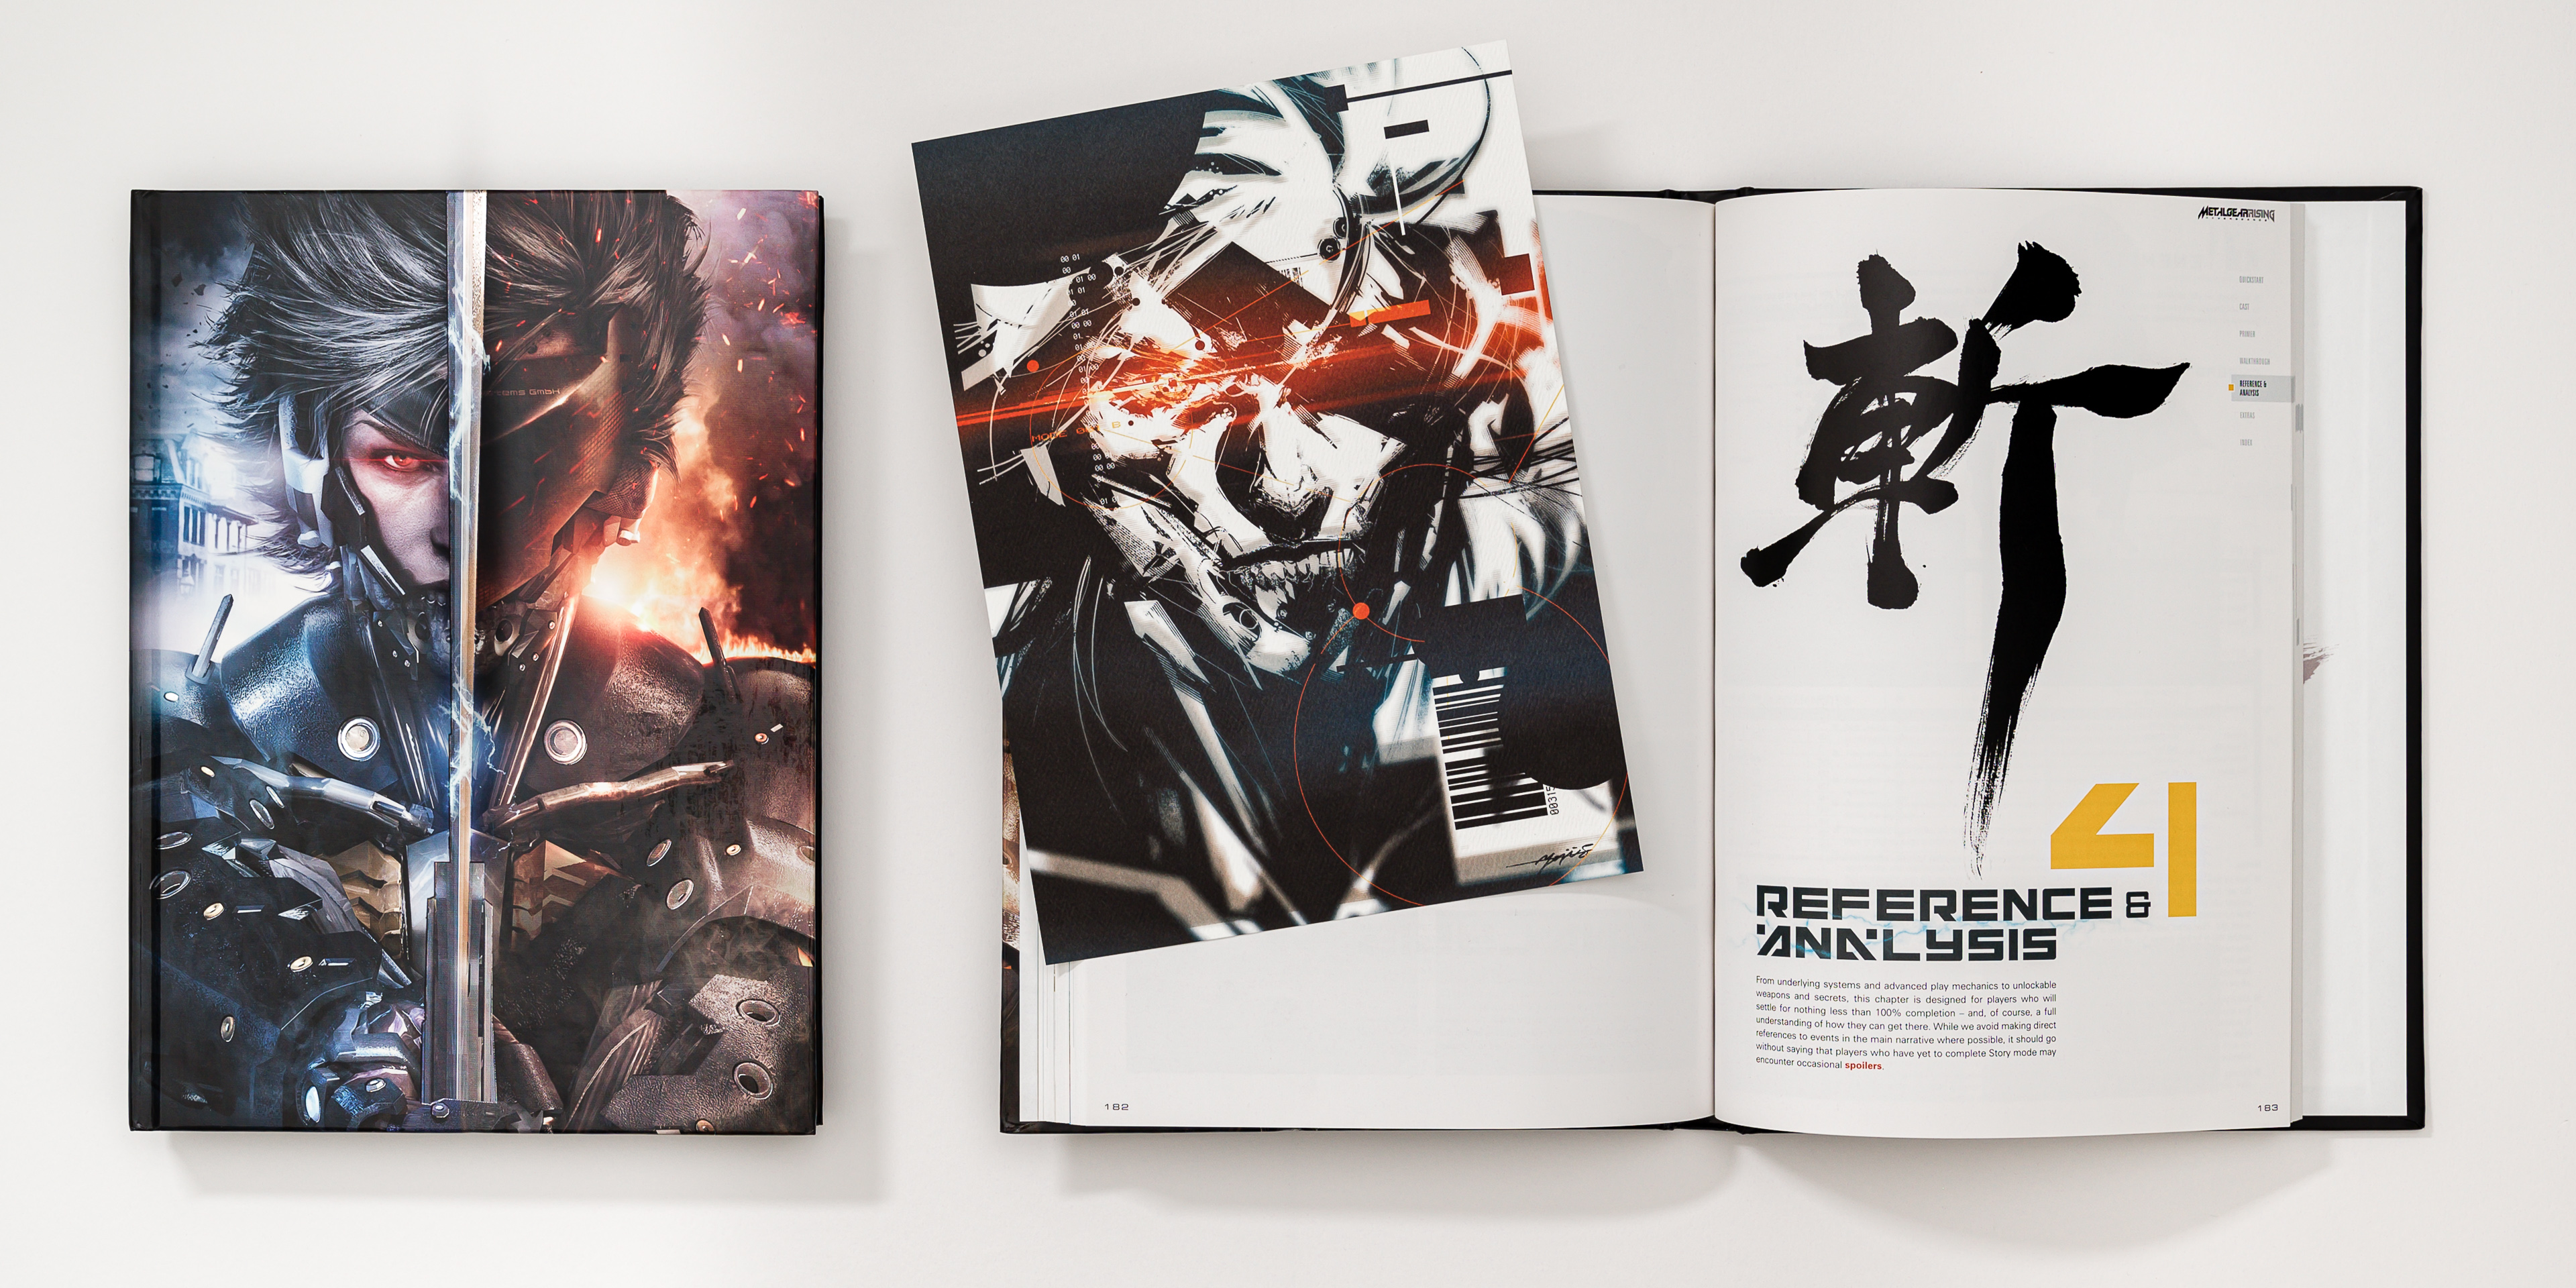 Metal Gear Rising: Revengeance cover or packaging material - MobyGames